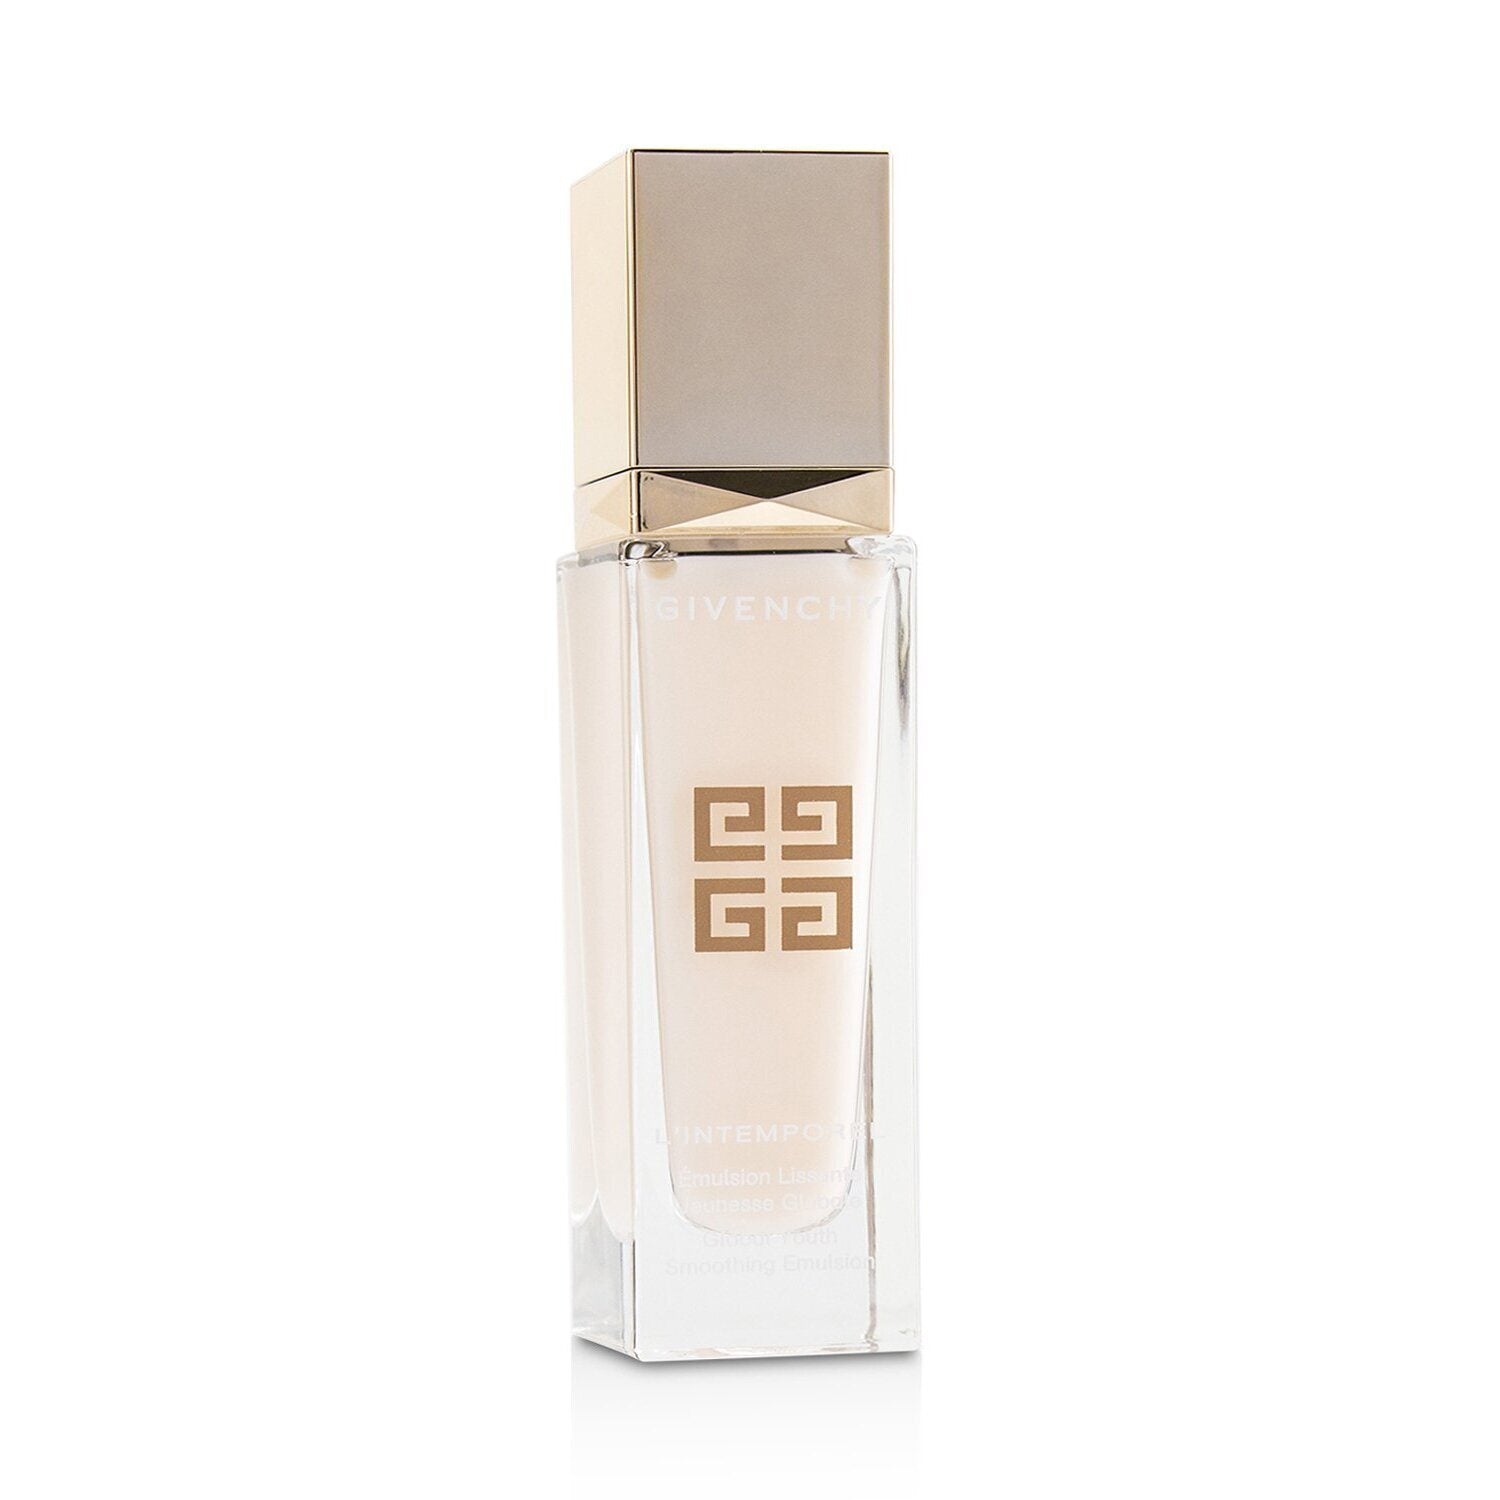 GIVENCHY - L'Intemporel Global Youth Smoothing Emulsion - 50ml/1.7oz~3P's Inclusive Beauty